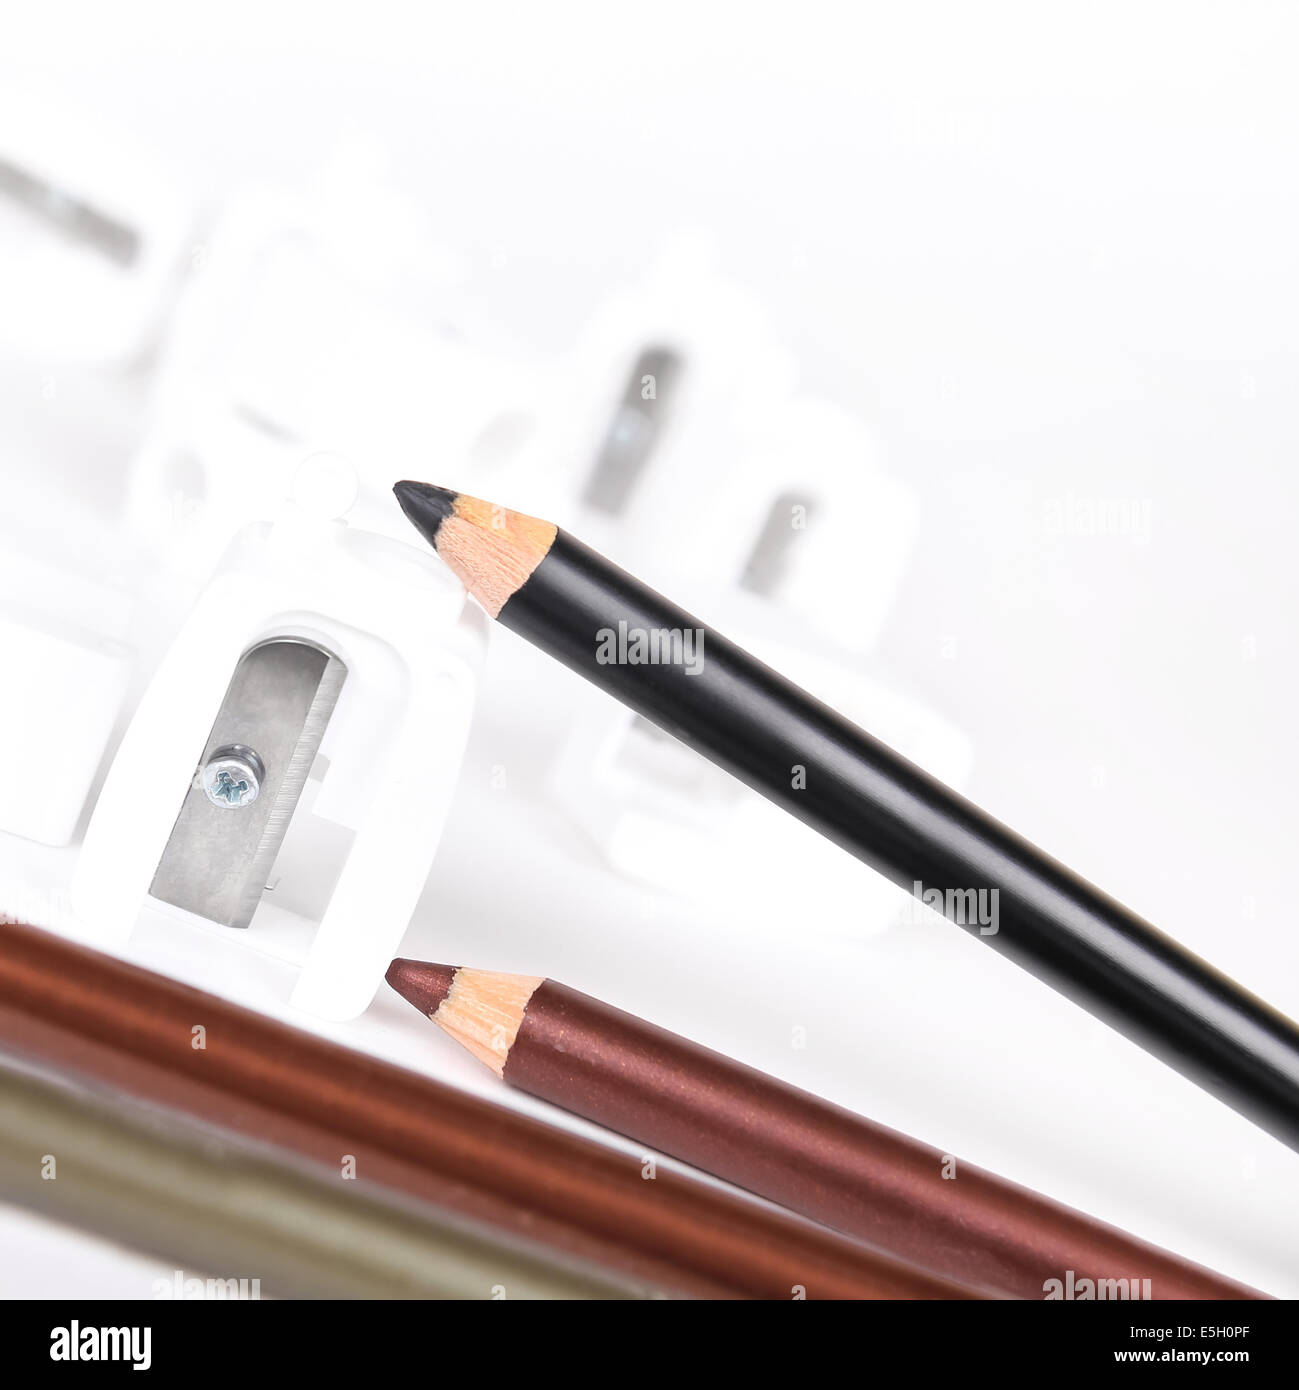 Sharpeners and make-up pencils on white background Stock Photo